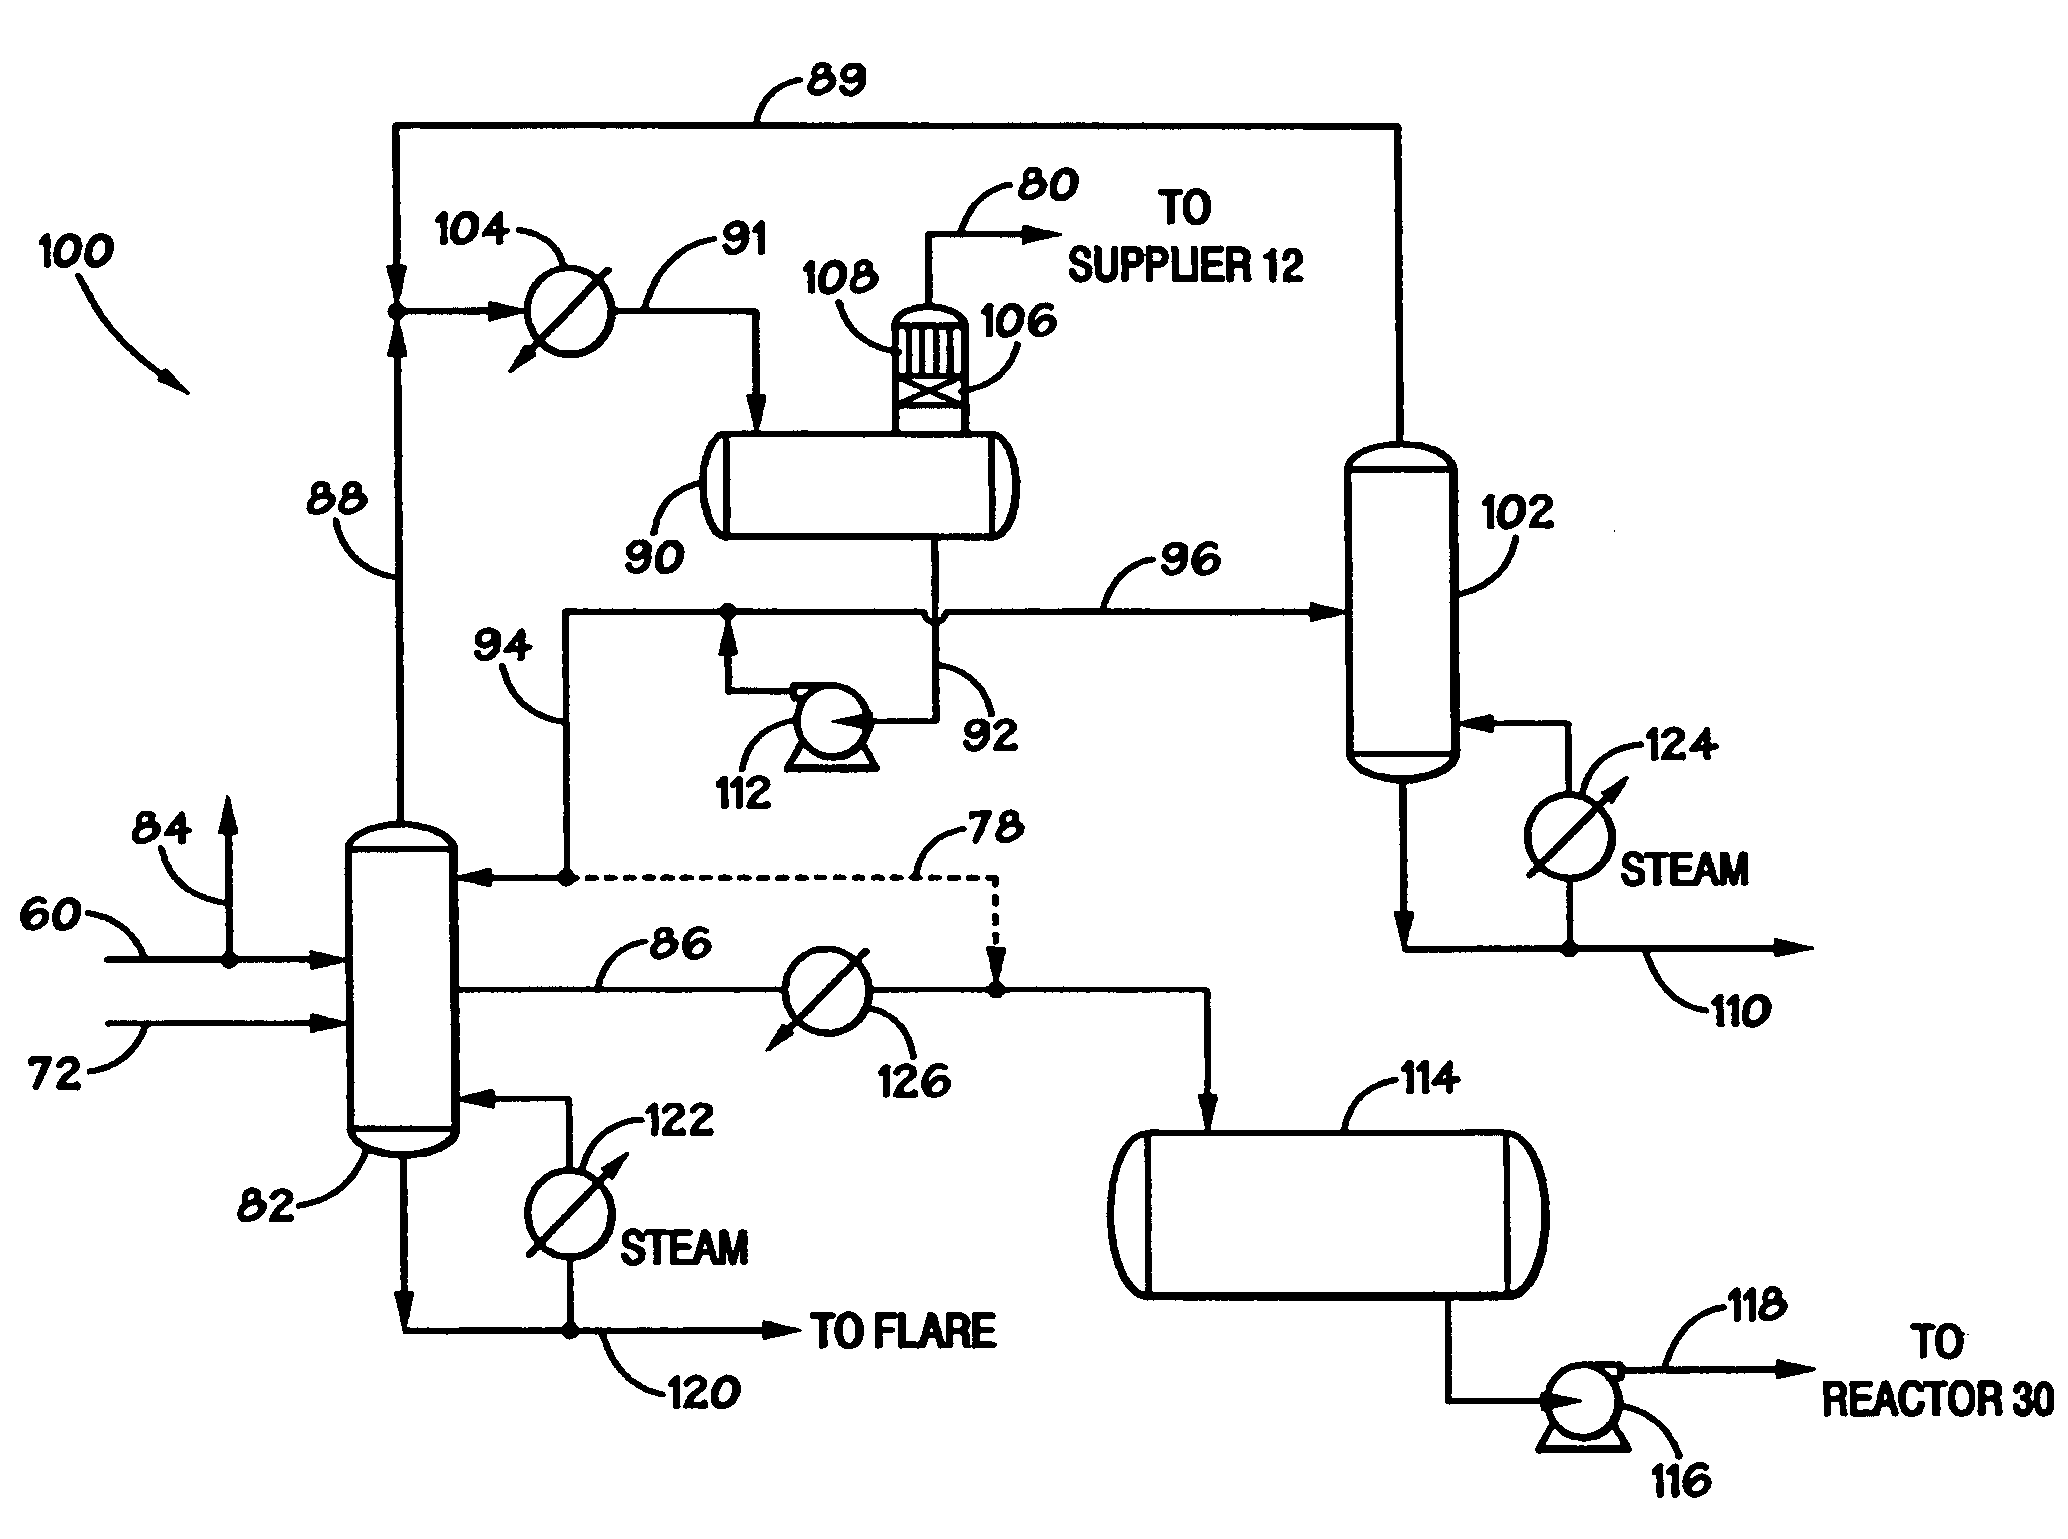 Monomer recovery by returning column overhead liquid to the reactor